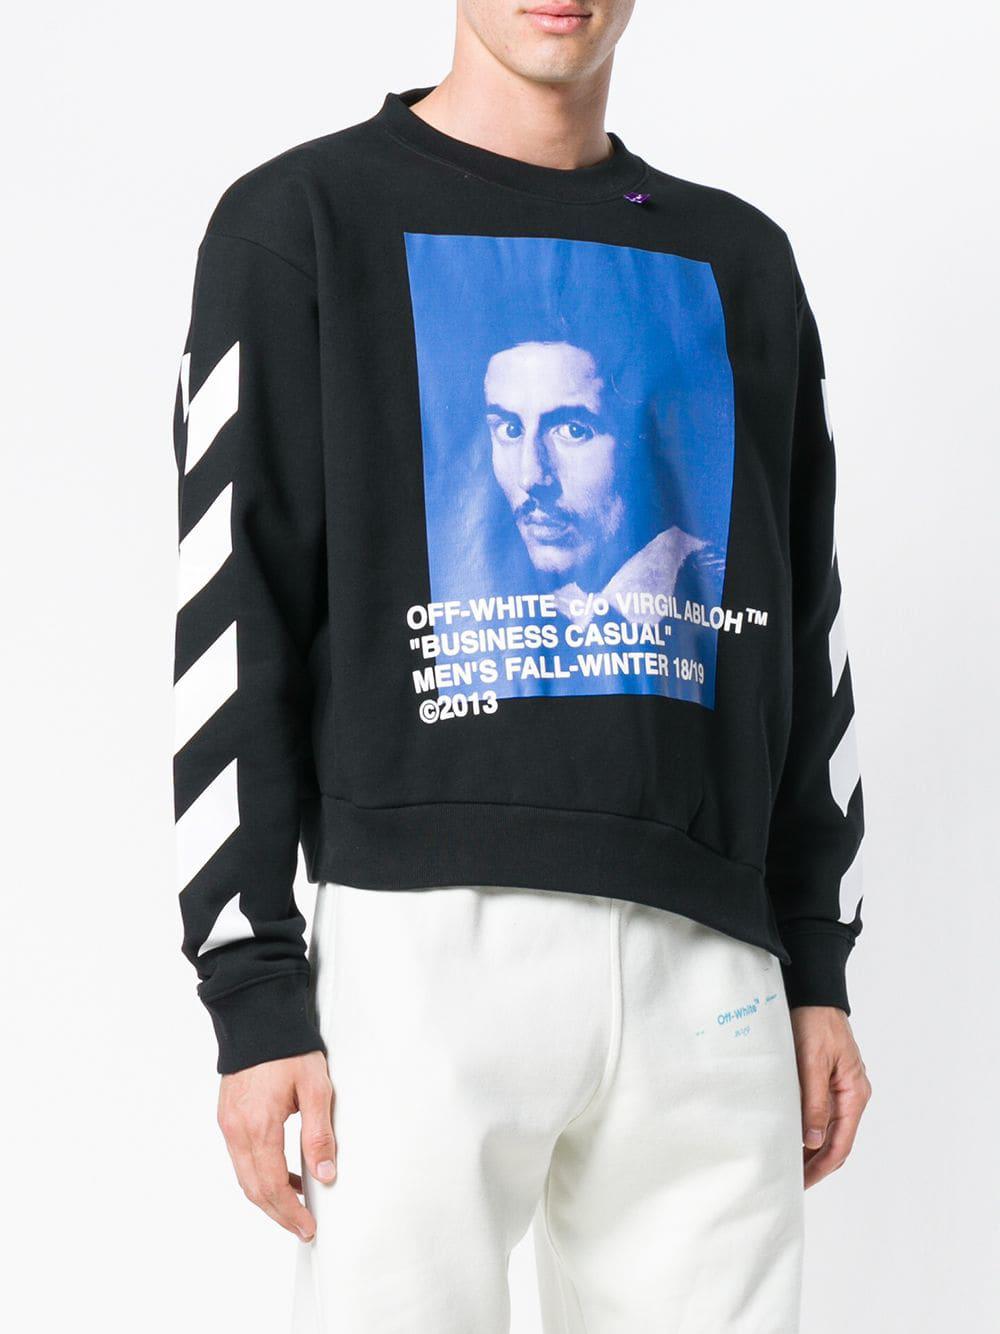 Off White Business Casual Hoodie Hot Sale, SAVE 37% 